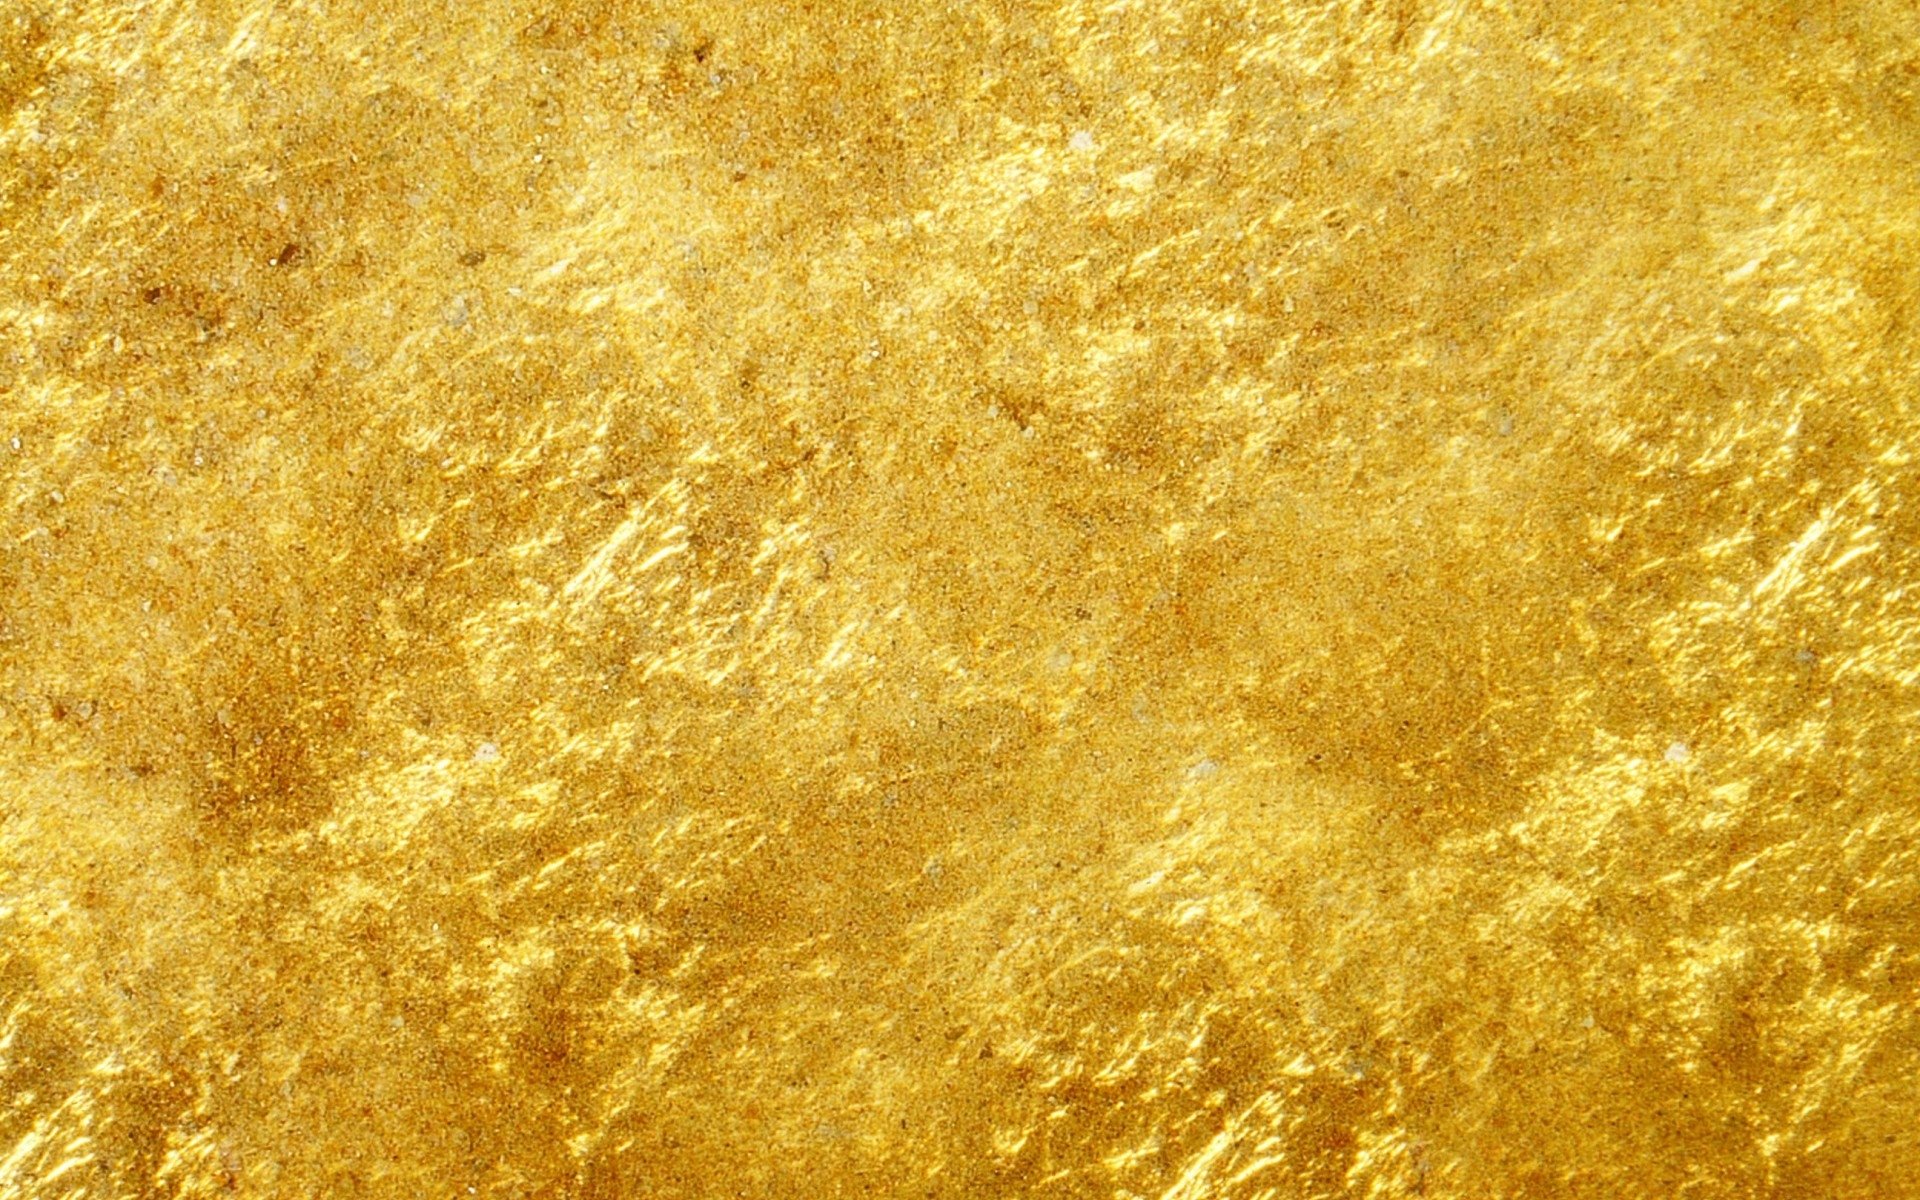 Gold Wallpapers and Background Images - stmed.net